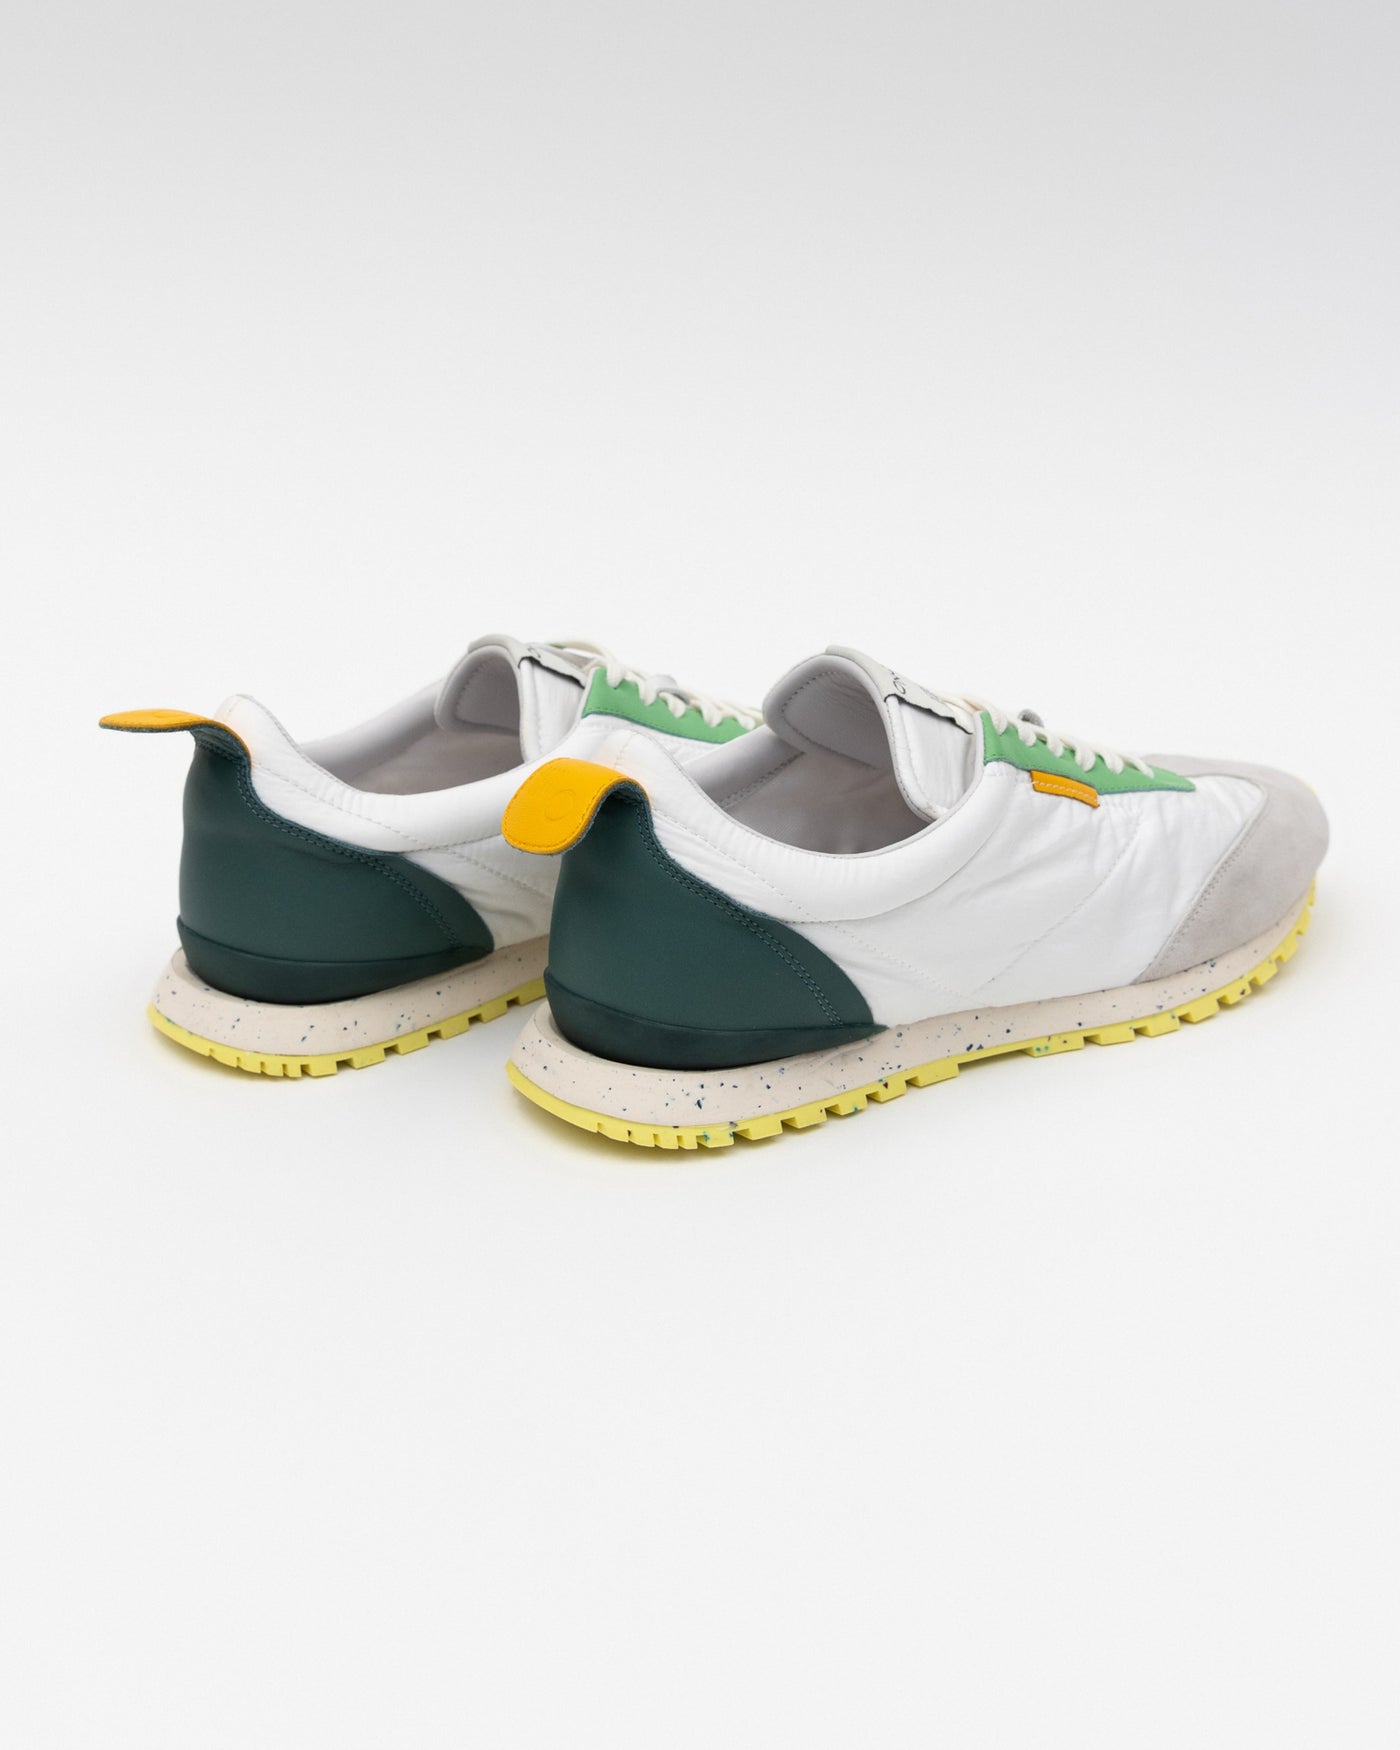 Tokyo Riviera White-Green Sneaker by Oncept